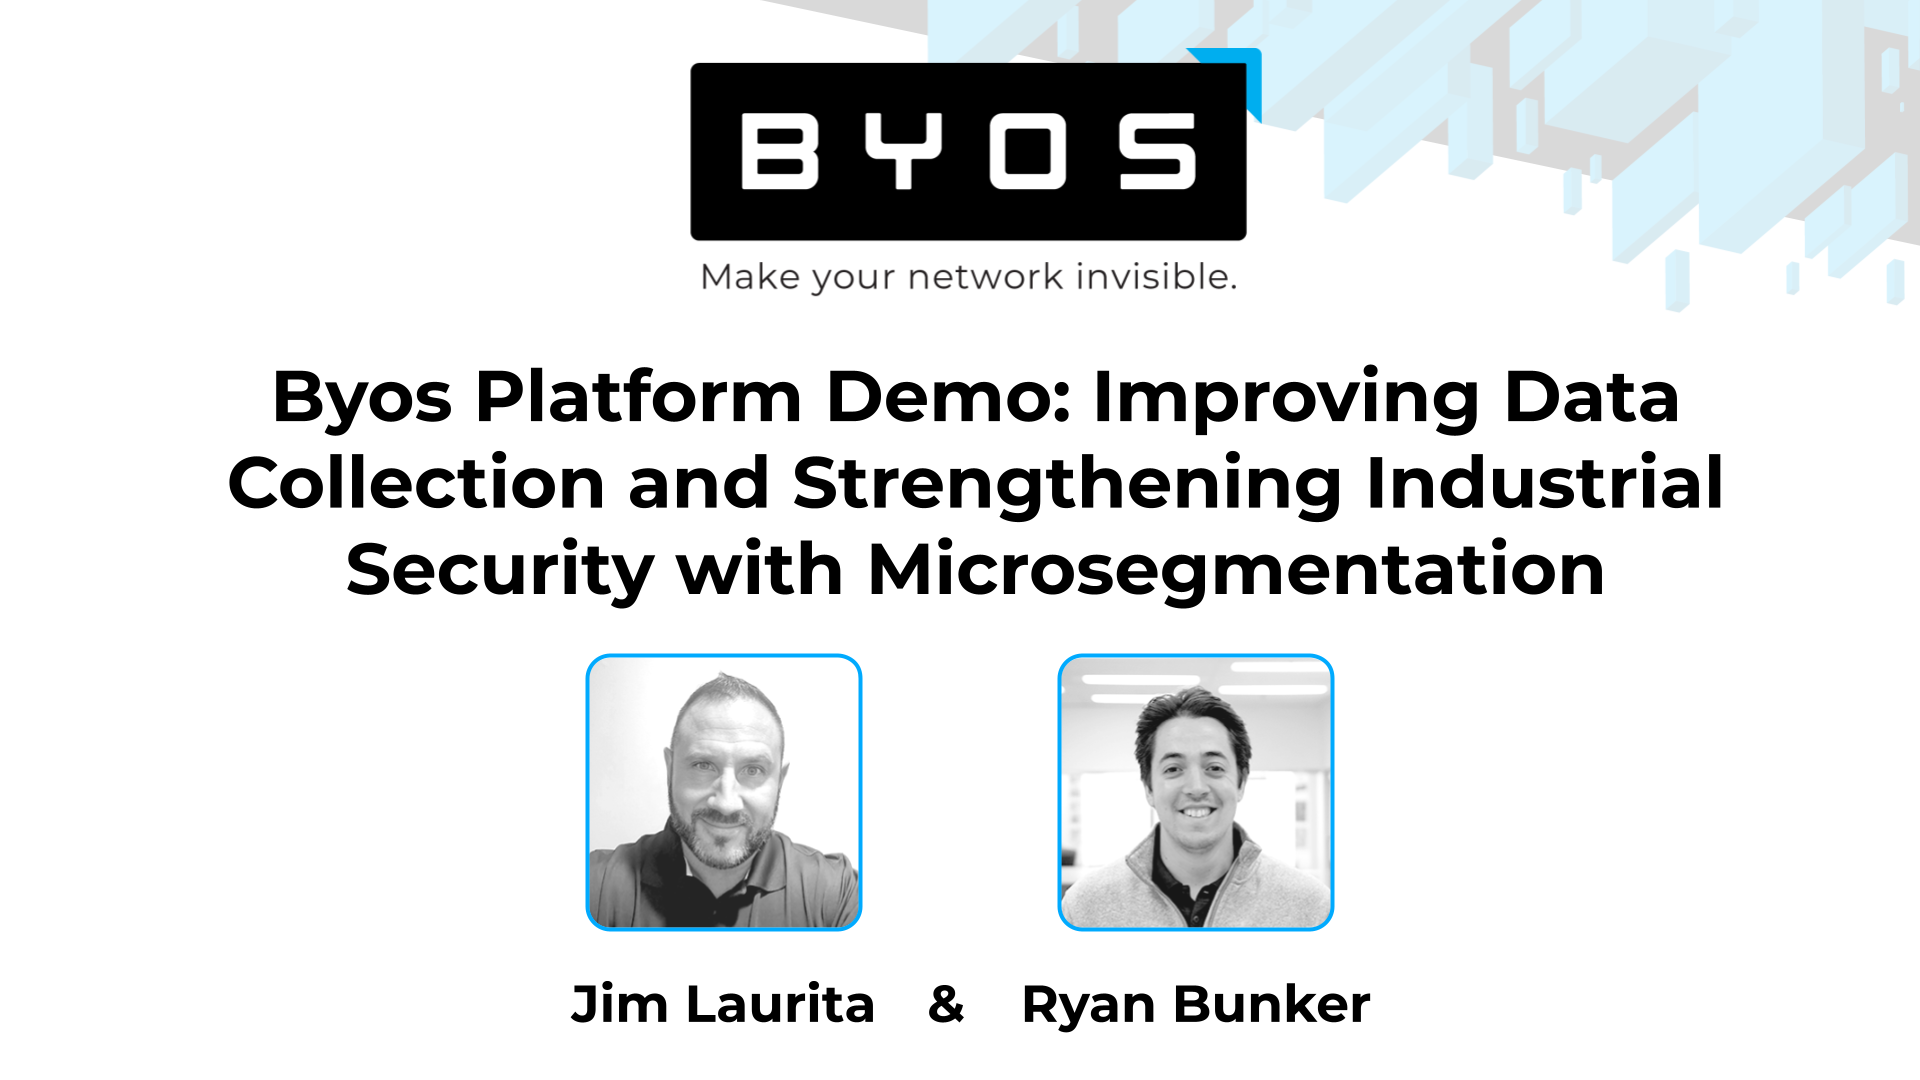 Full Byos Platform Demo : Improving Data Collection and Strengthening Industrial Security